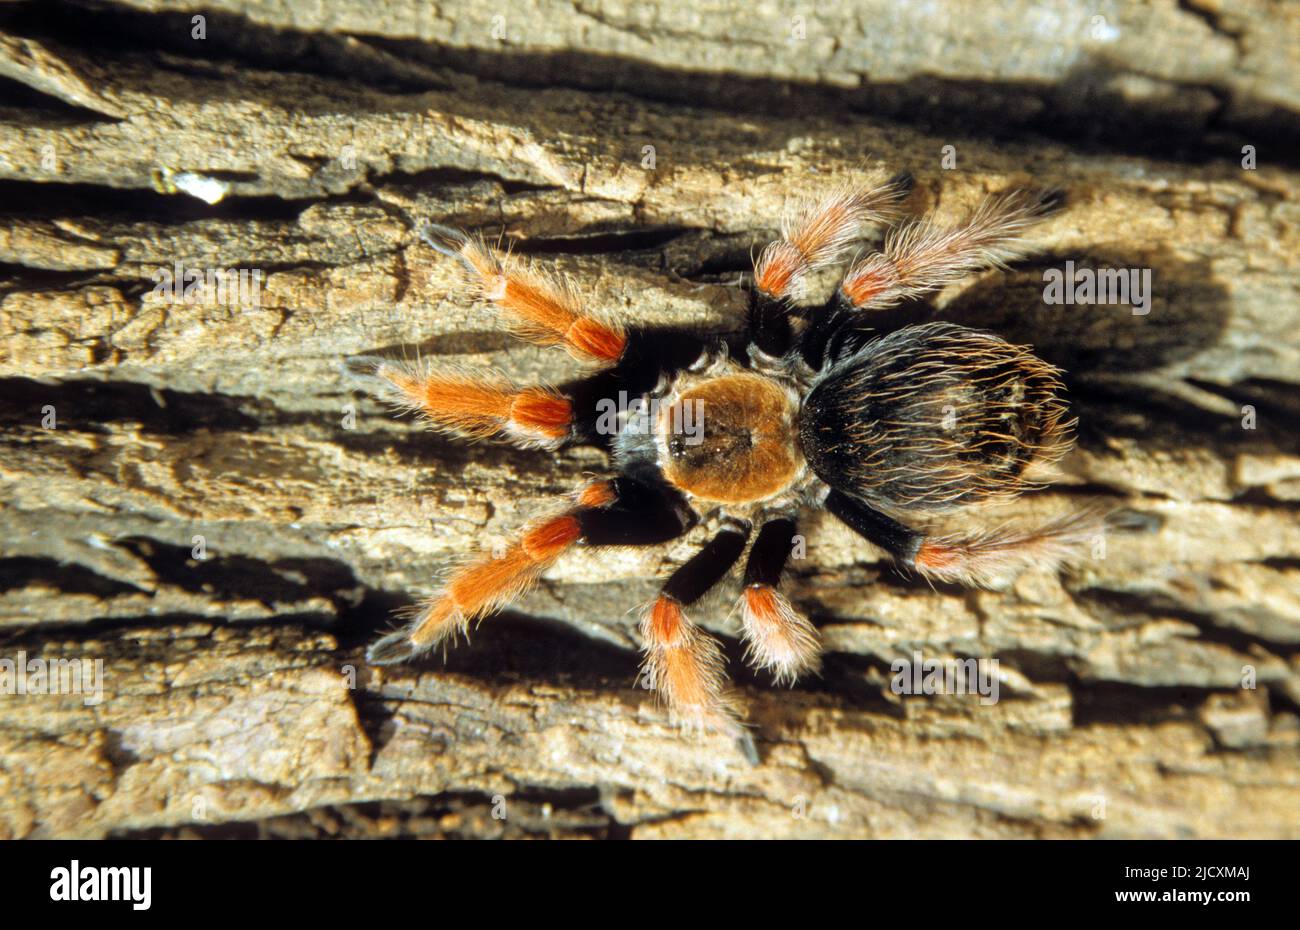 Mexican red-leg tarantula. The Mexican red-leg, or redknee, tarantula (Brachypelma smithi) is a spider that preys on insects, rodents and small birds. Stock Photo